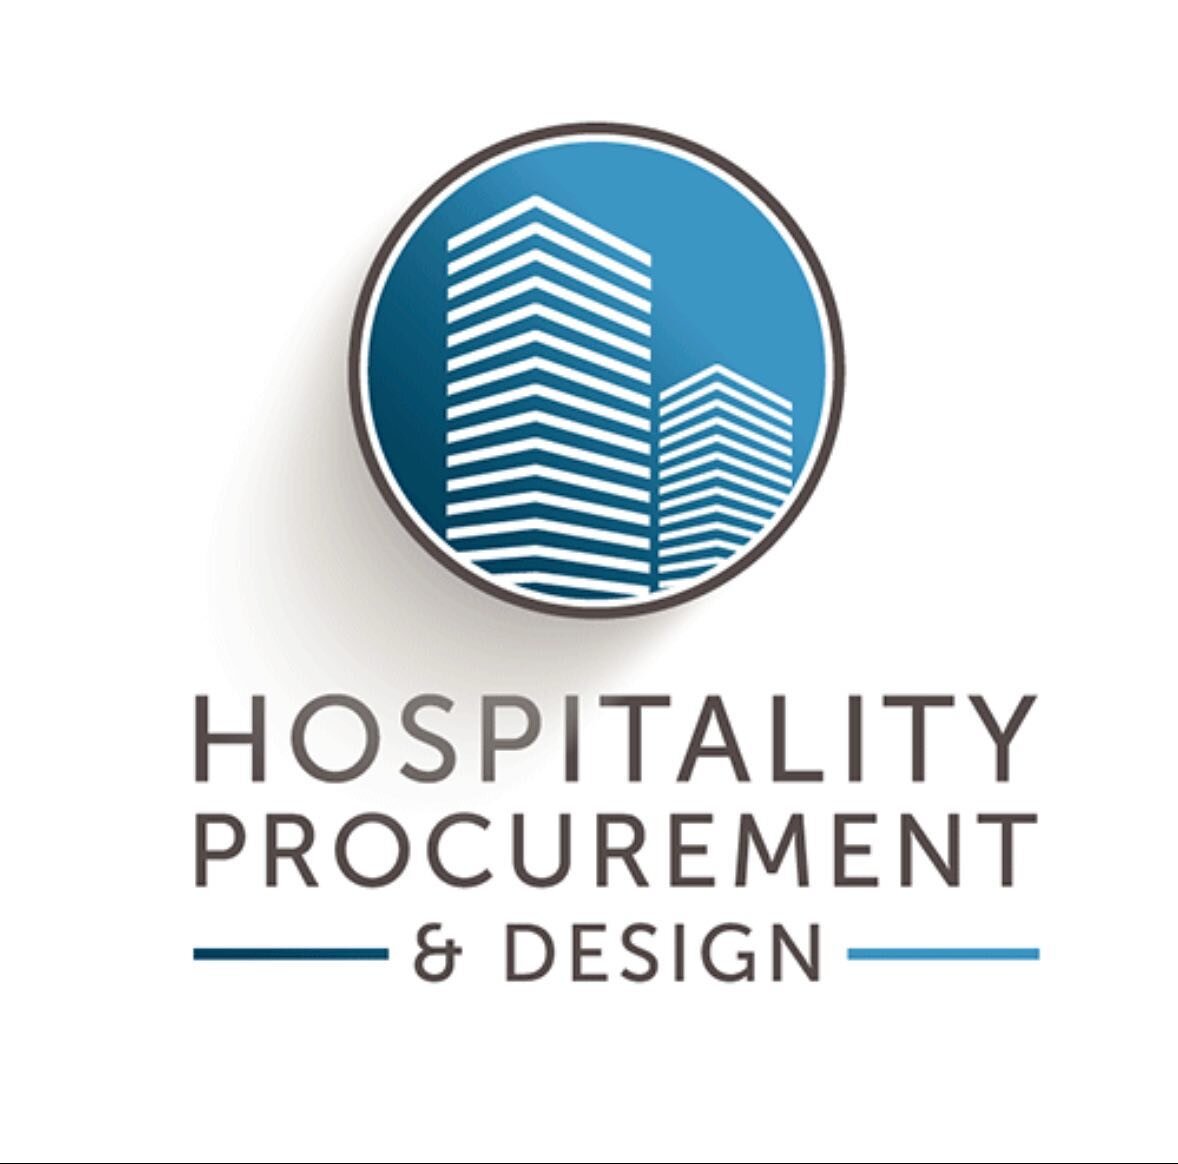 Hospitality Procurement &amp; Design (HPD), a procurement firm based out of Las Vegas, Nevada, offers extensive experience in the procurement of FF&amp;E, OS&amp;E, as well as logistic services. We use decades of best practices for handling new const